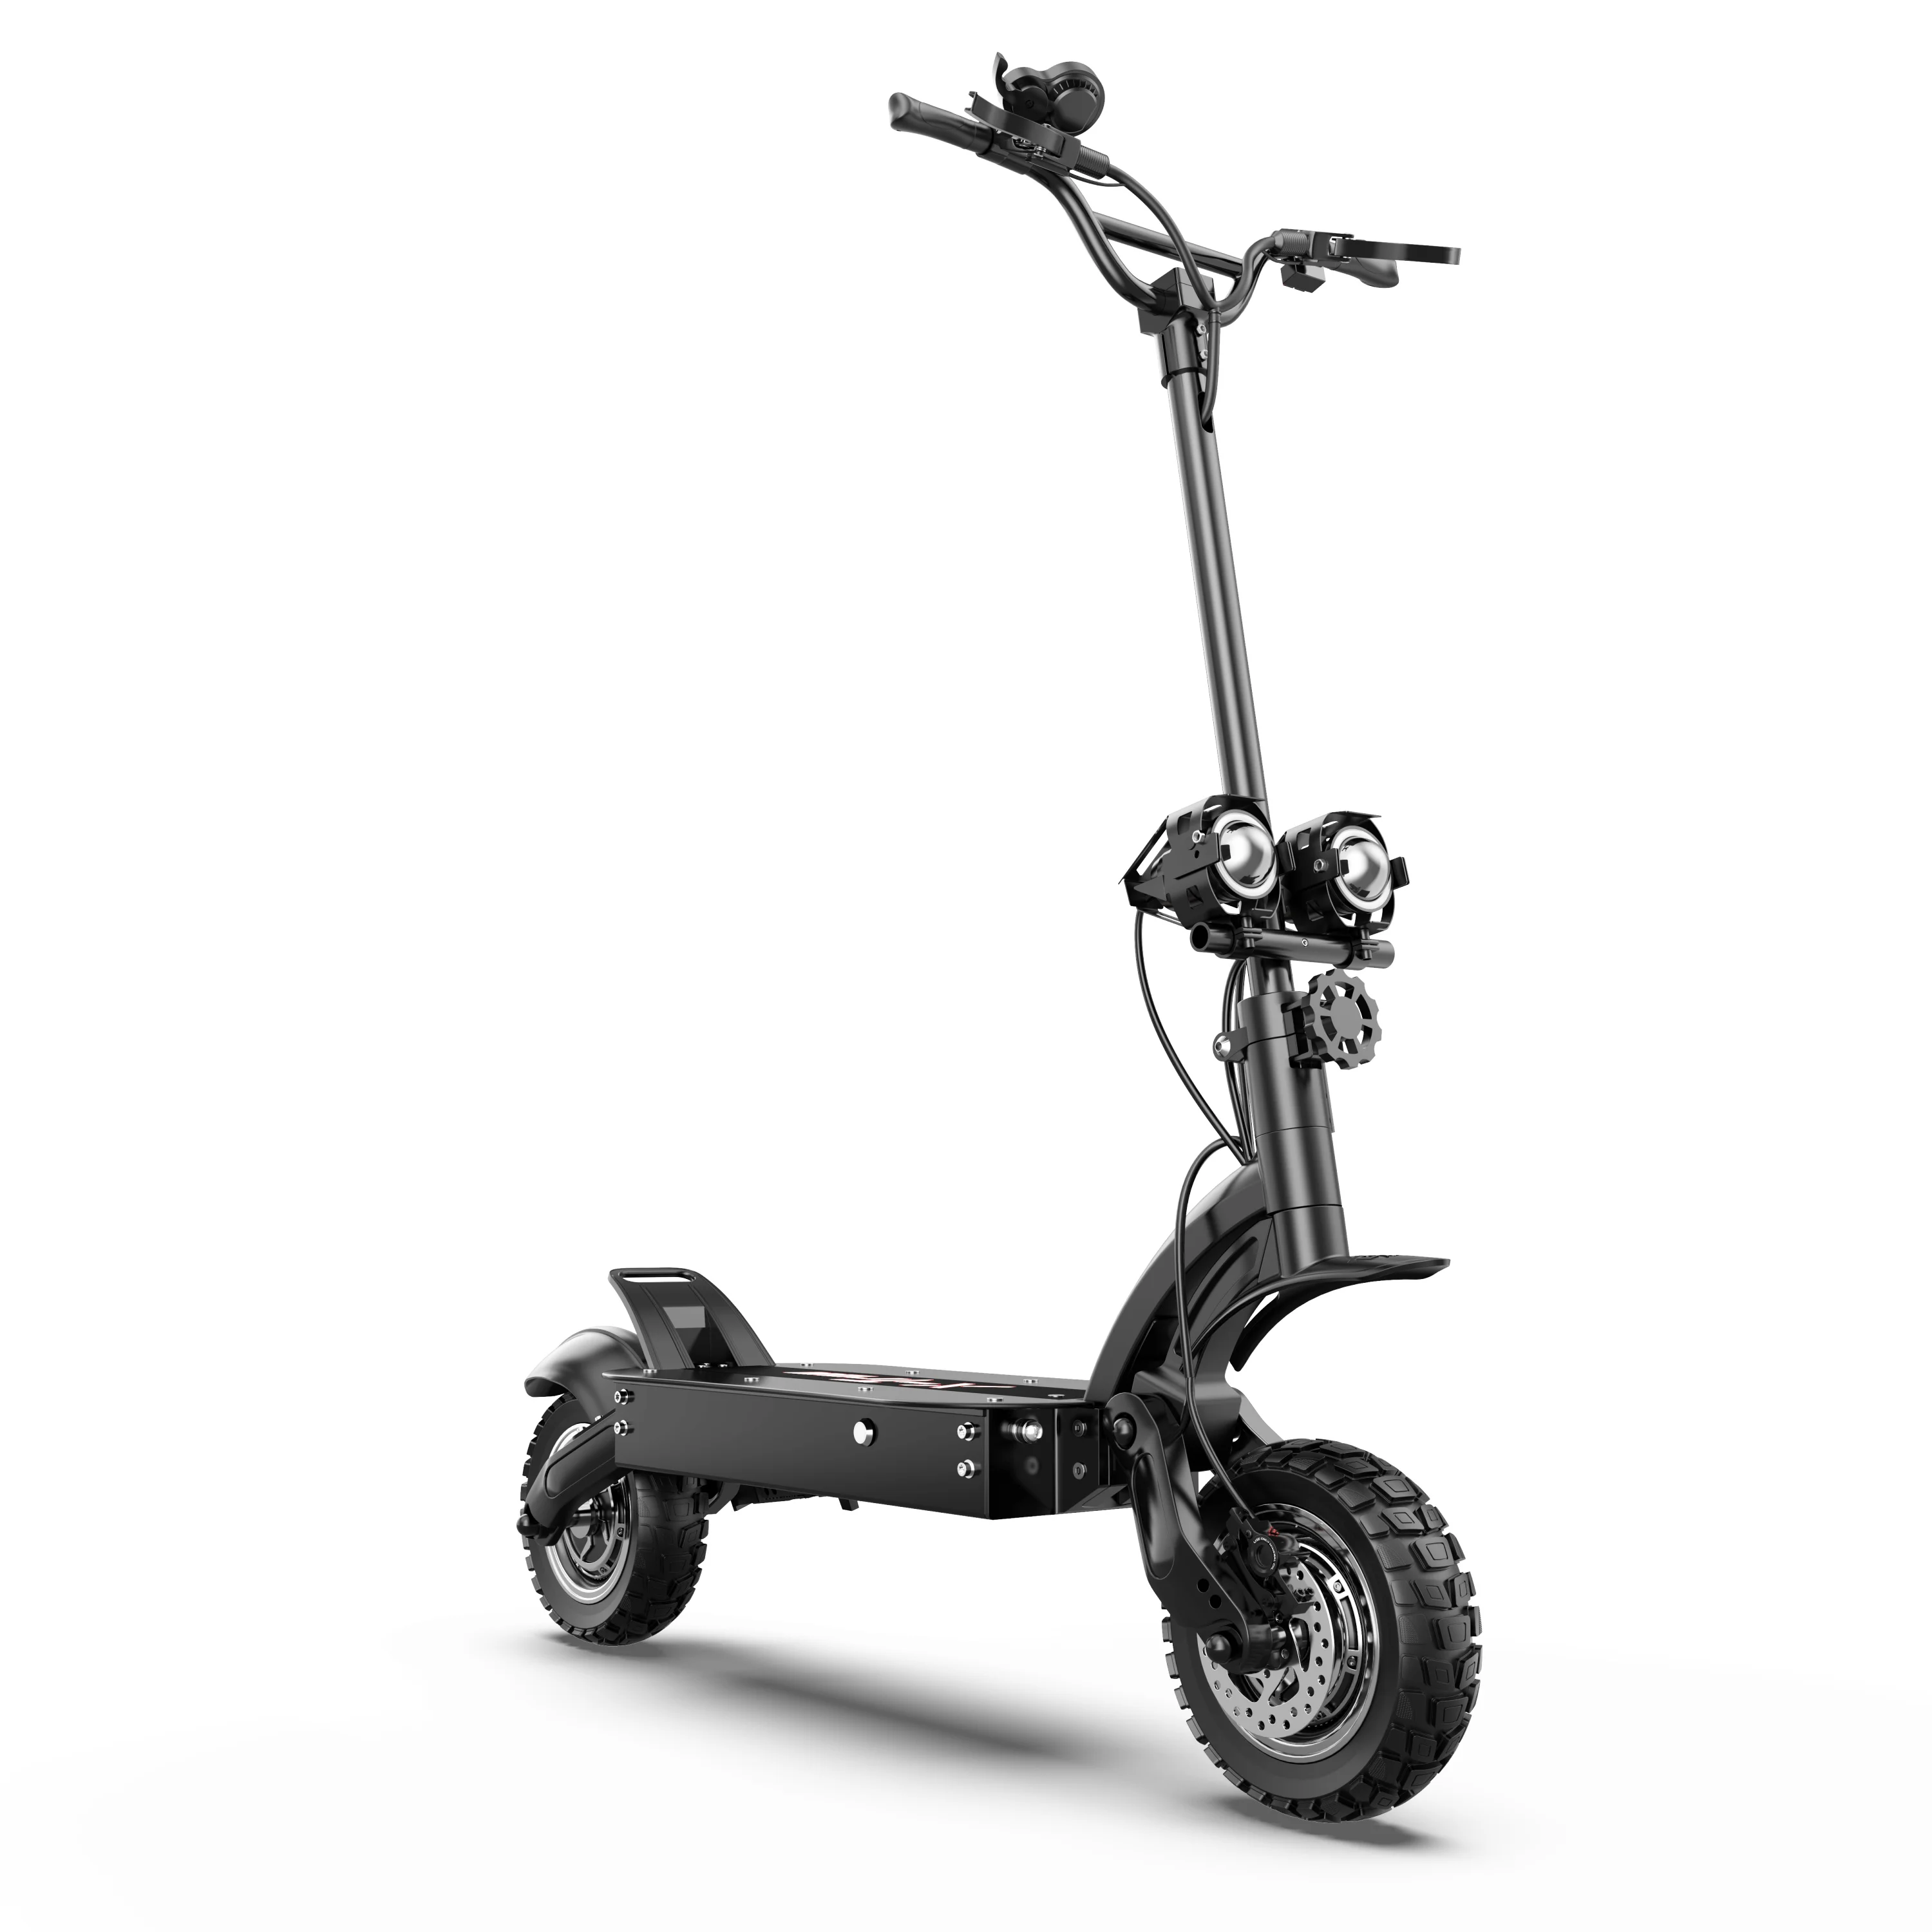 US stock FREE SHIPPING 52V 23.4A 10inch Powerful Double Motor Drive High Speed 70km/h electric scooter 2000w Offroad e-scooter